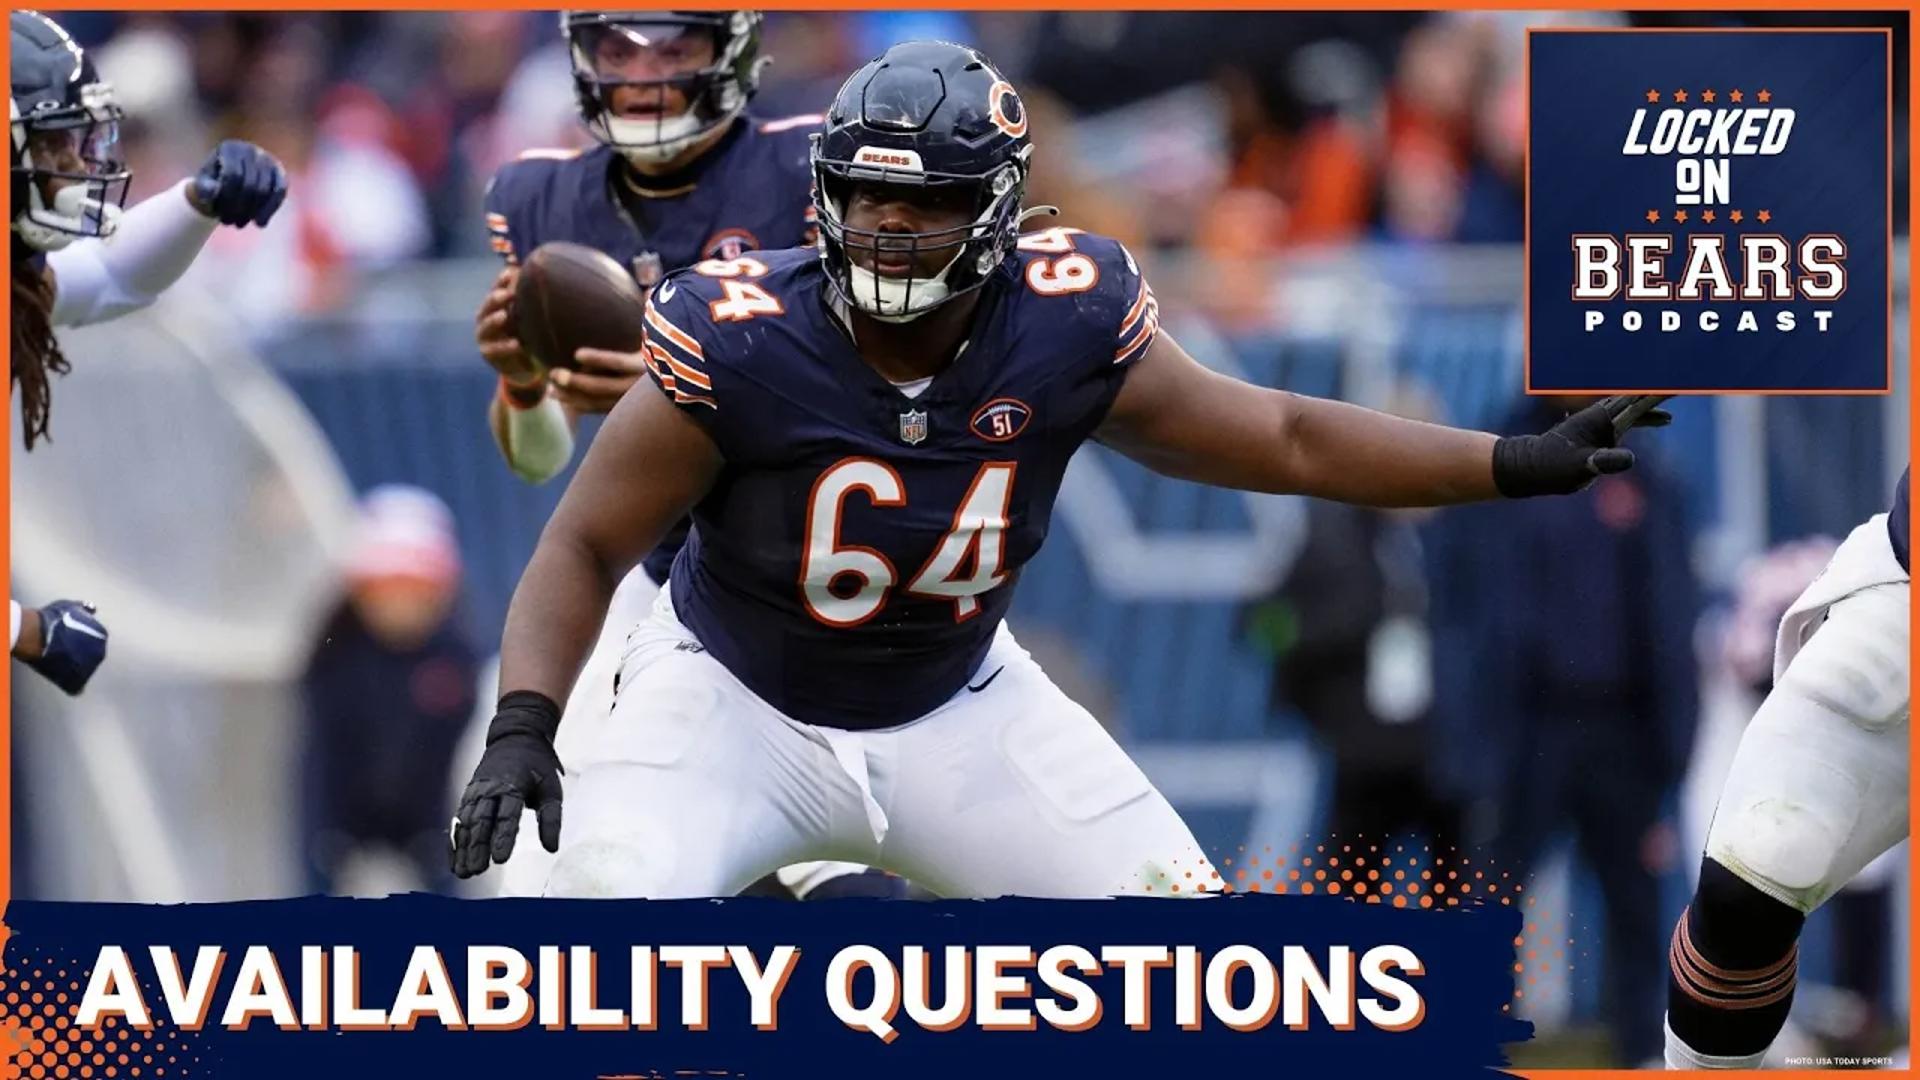 Chicago Bears right guard Nate Davis isn't participating in mandatory minicamp, again. It's becoming a troubling pattern for the veteran offensive lineman.